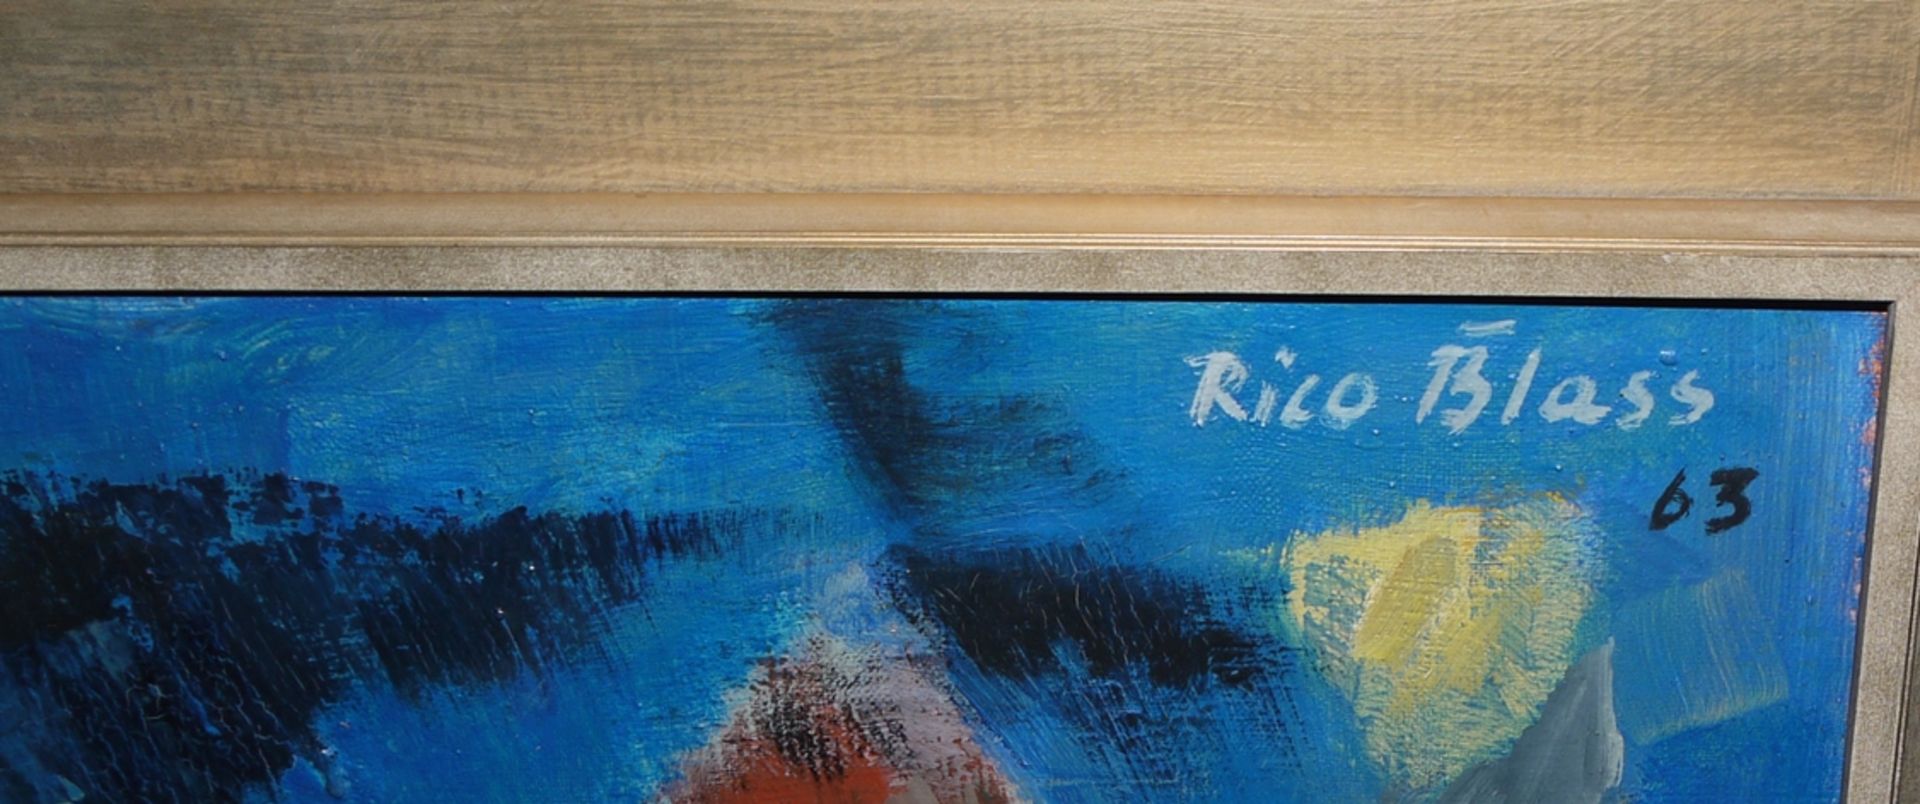 Rico Blass, Informel, large oil painting from 1963, framed - Image 2 of 2